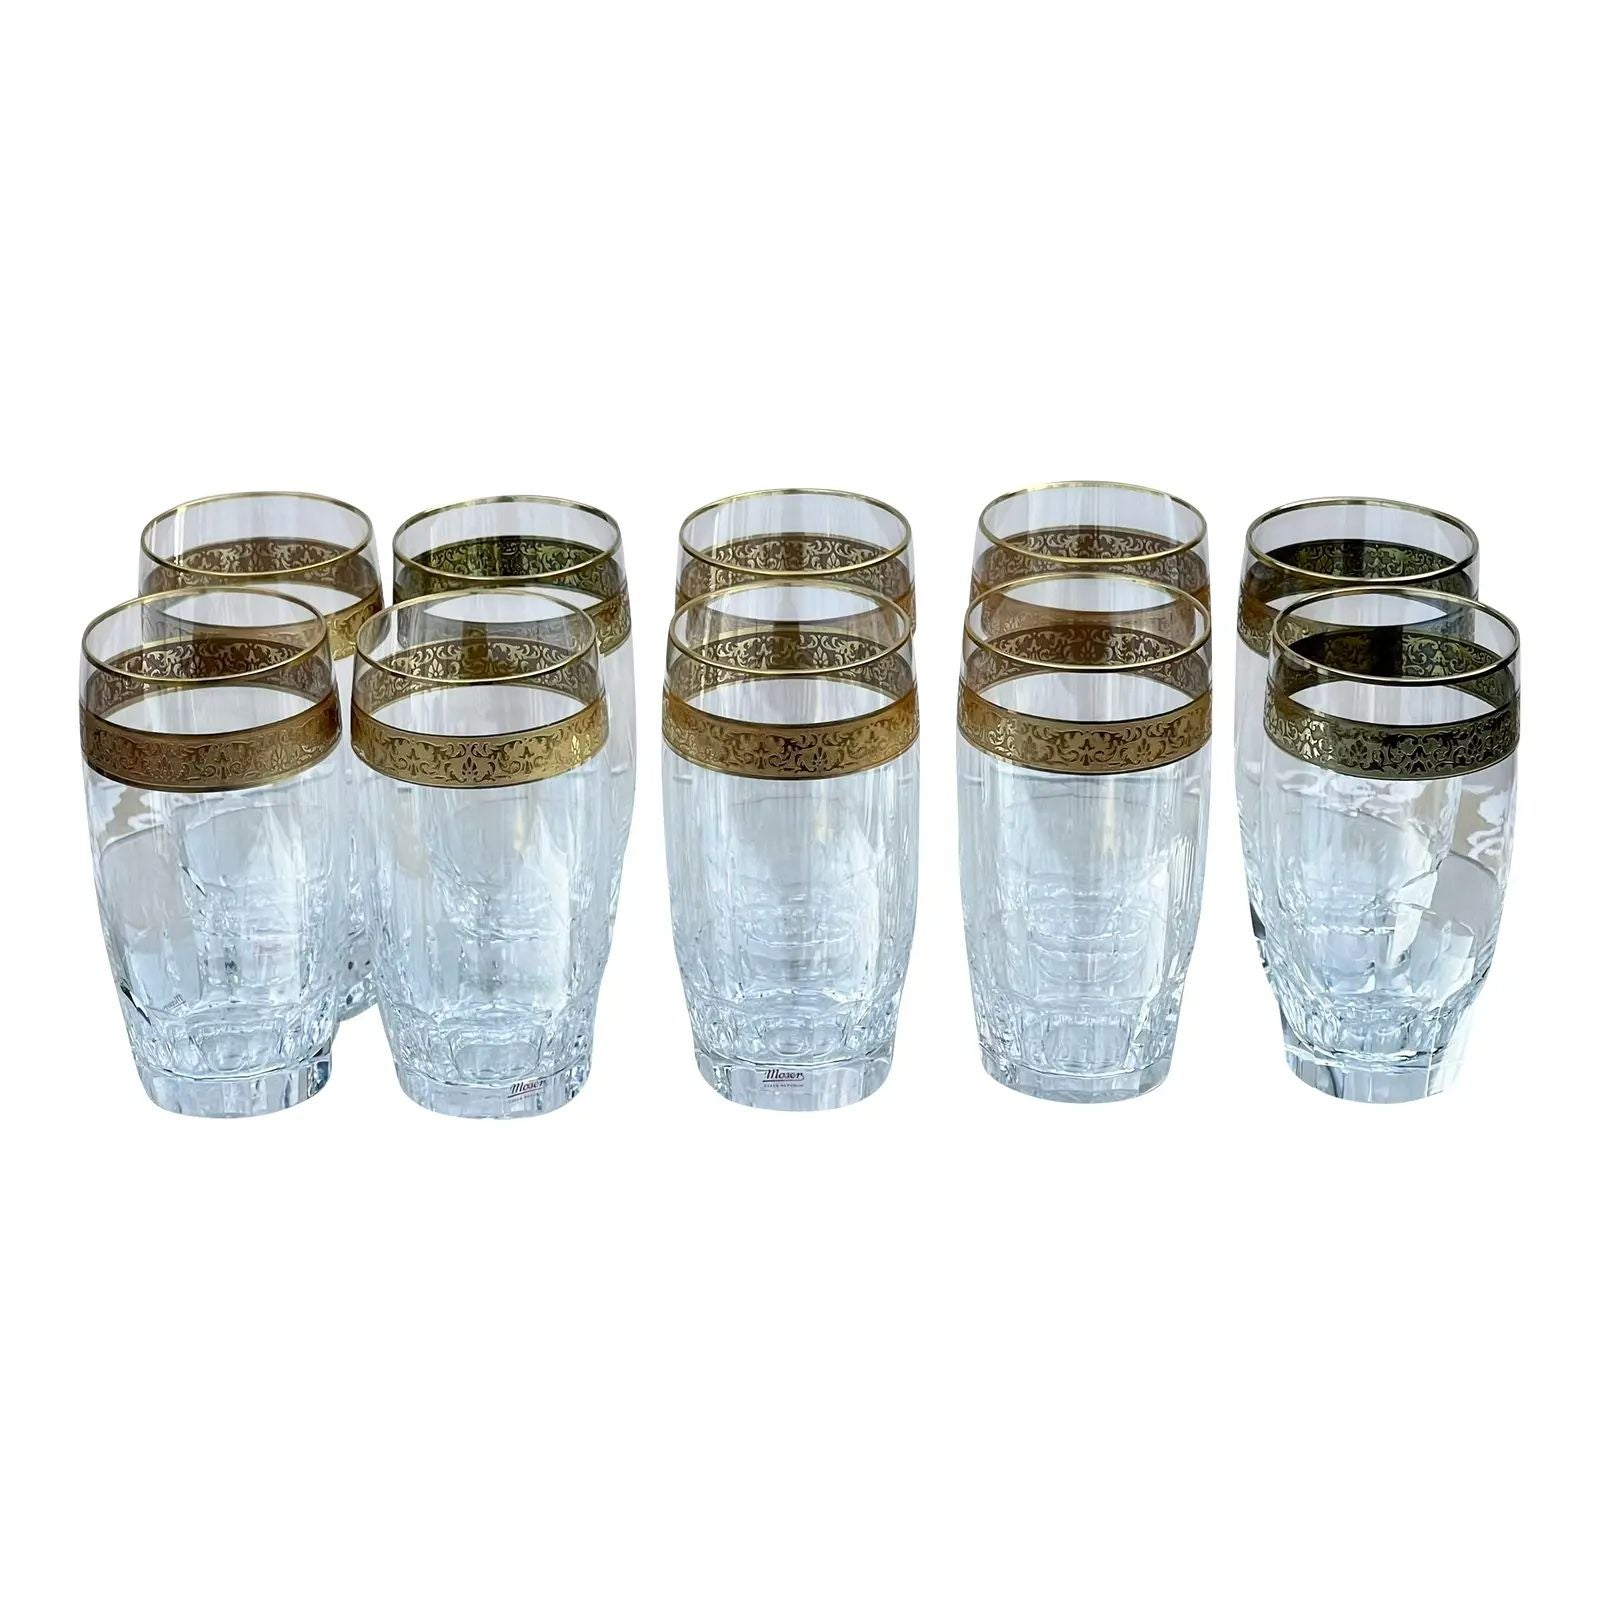 Set of 10 Moser Gold Encrusted Crystal Juice Tumblers, 1980s For Sale